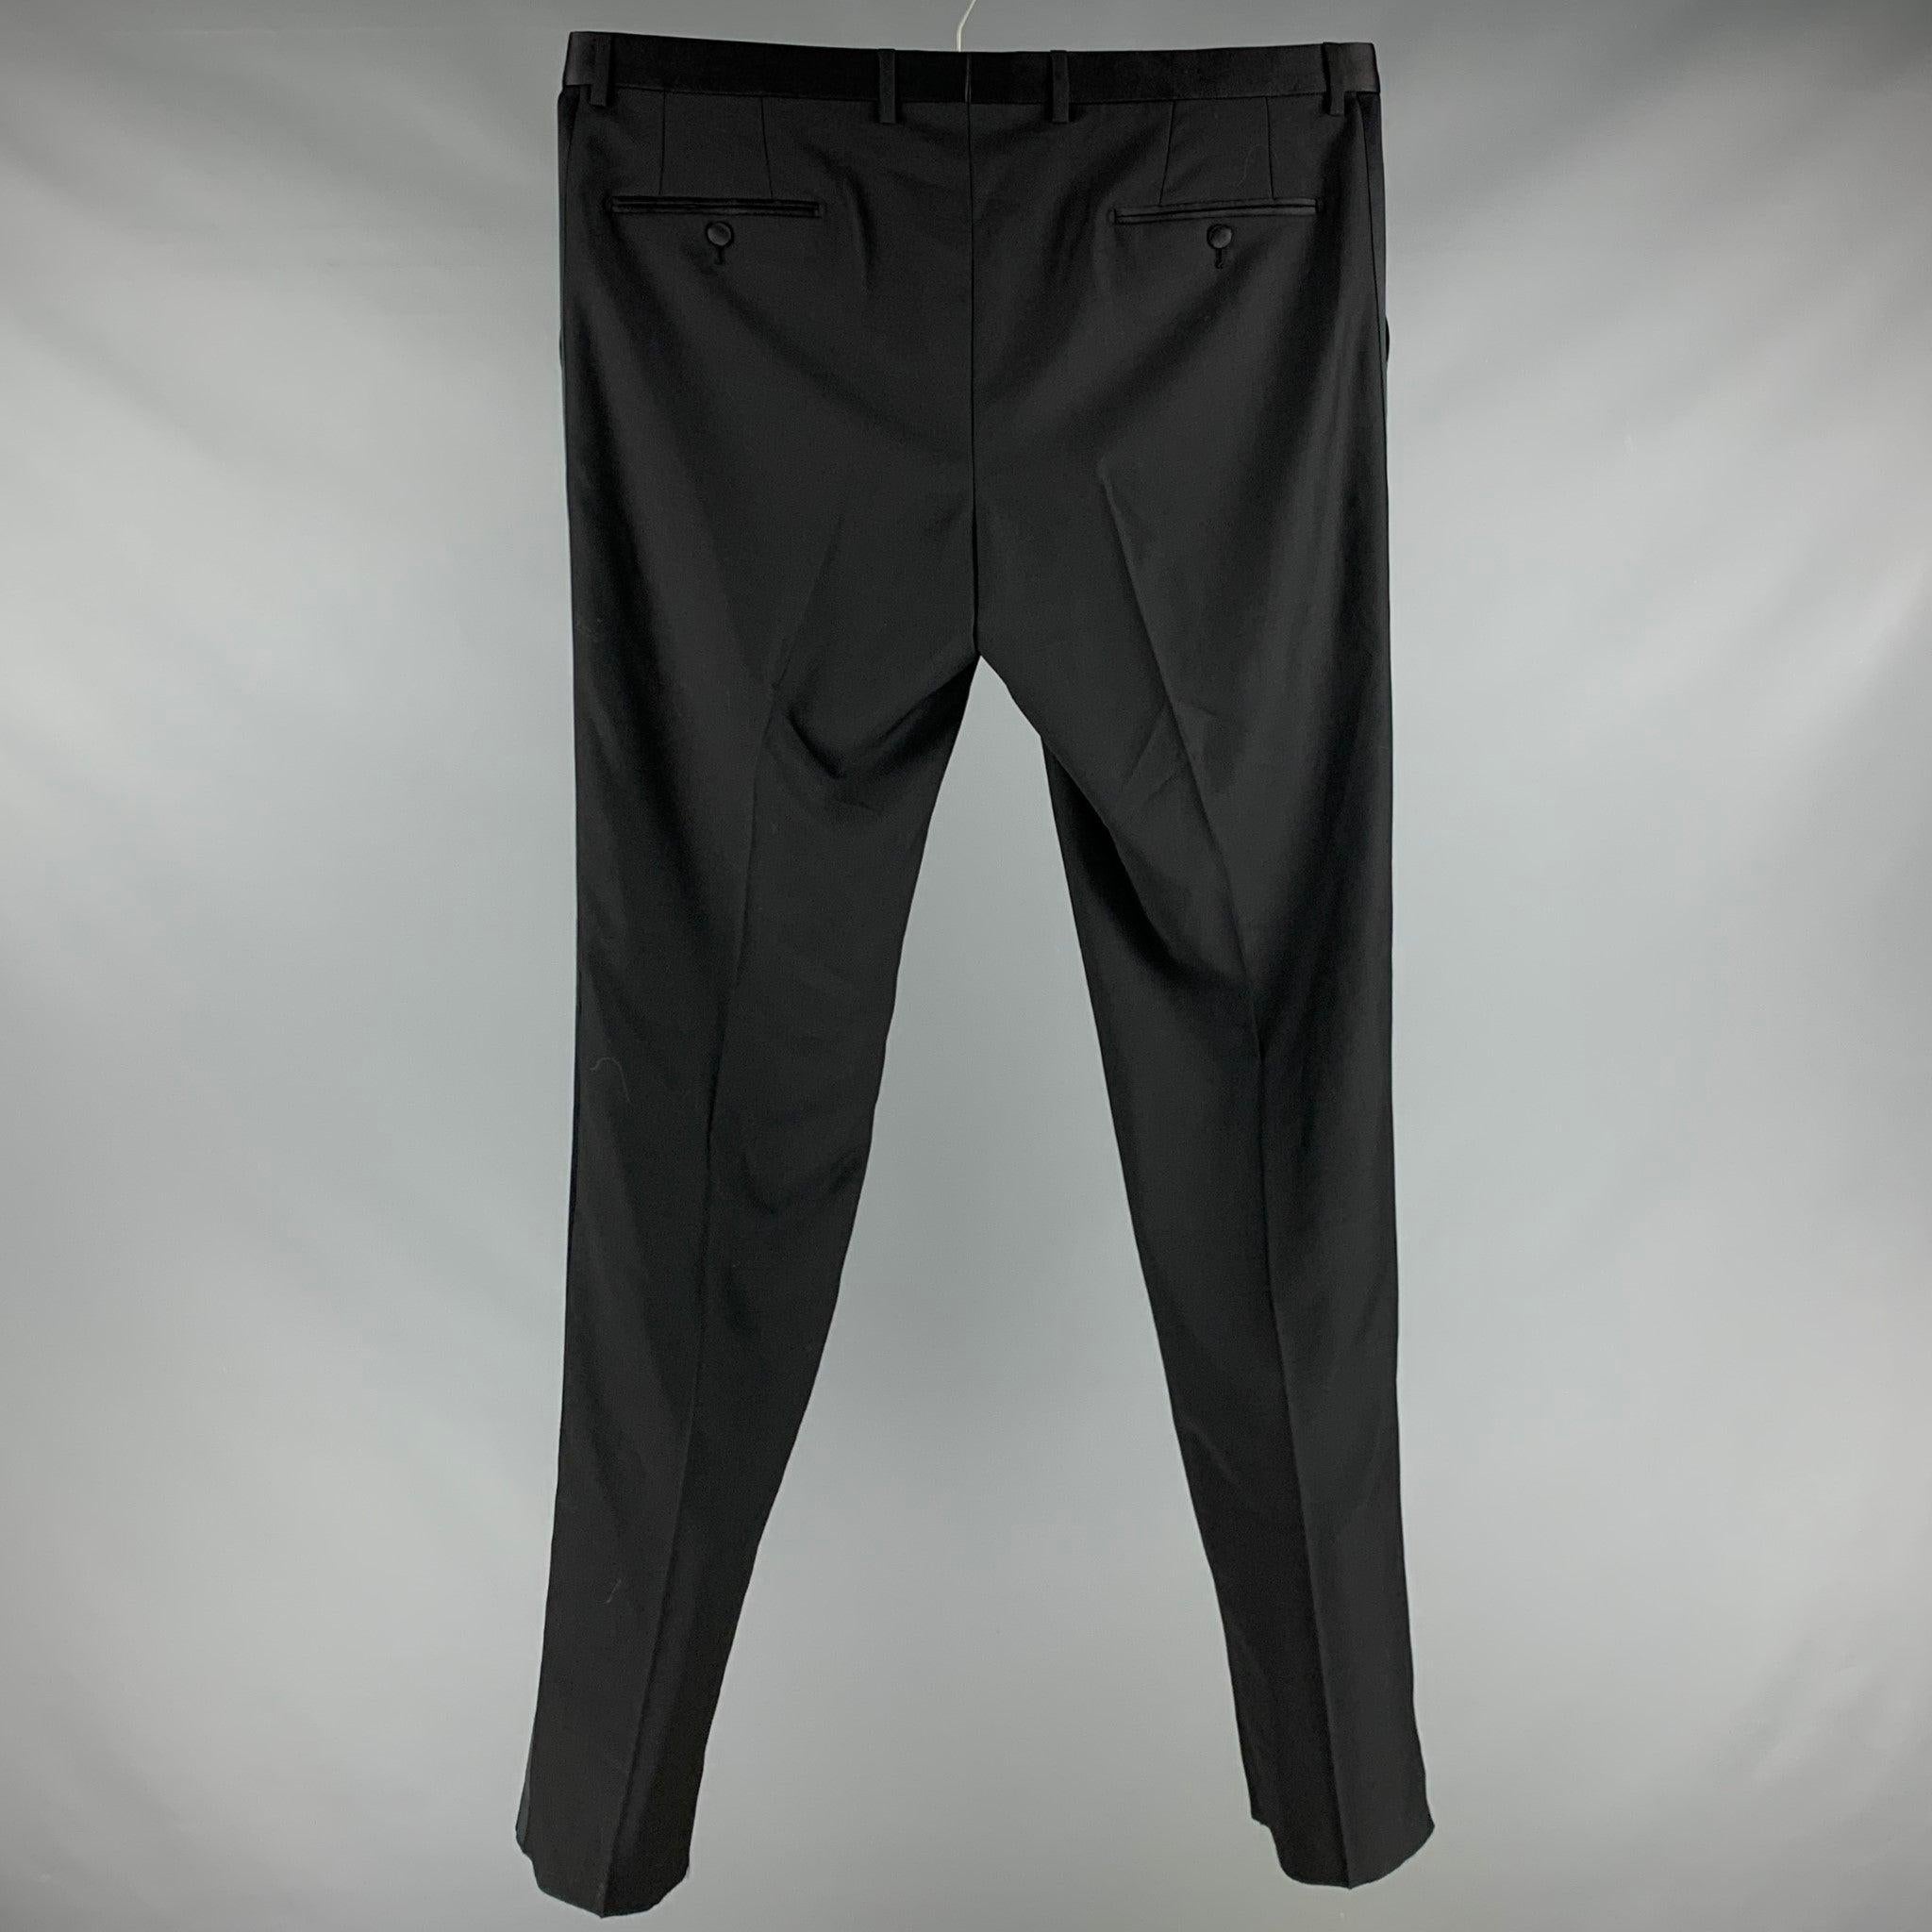 DOLCE & GABBANA dress
pants in a black wool blend fabric featuring satin waistband and stripes, flat front style, and zip fly closure. Made in Italy.Very Good Pre-Owned Condition. 

Marked:  IT 60 

Measurements: 
 Waist: 40 inches Rise: 8.5 inches